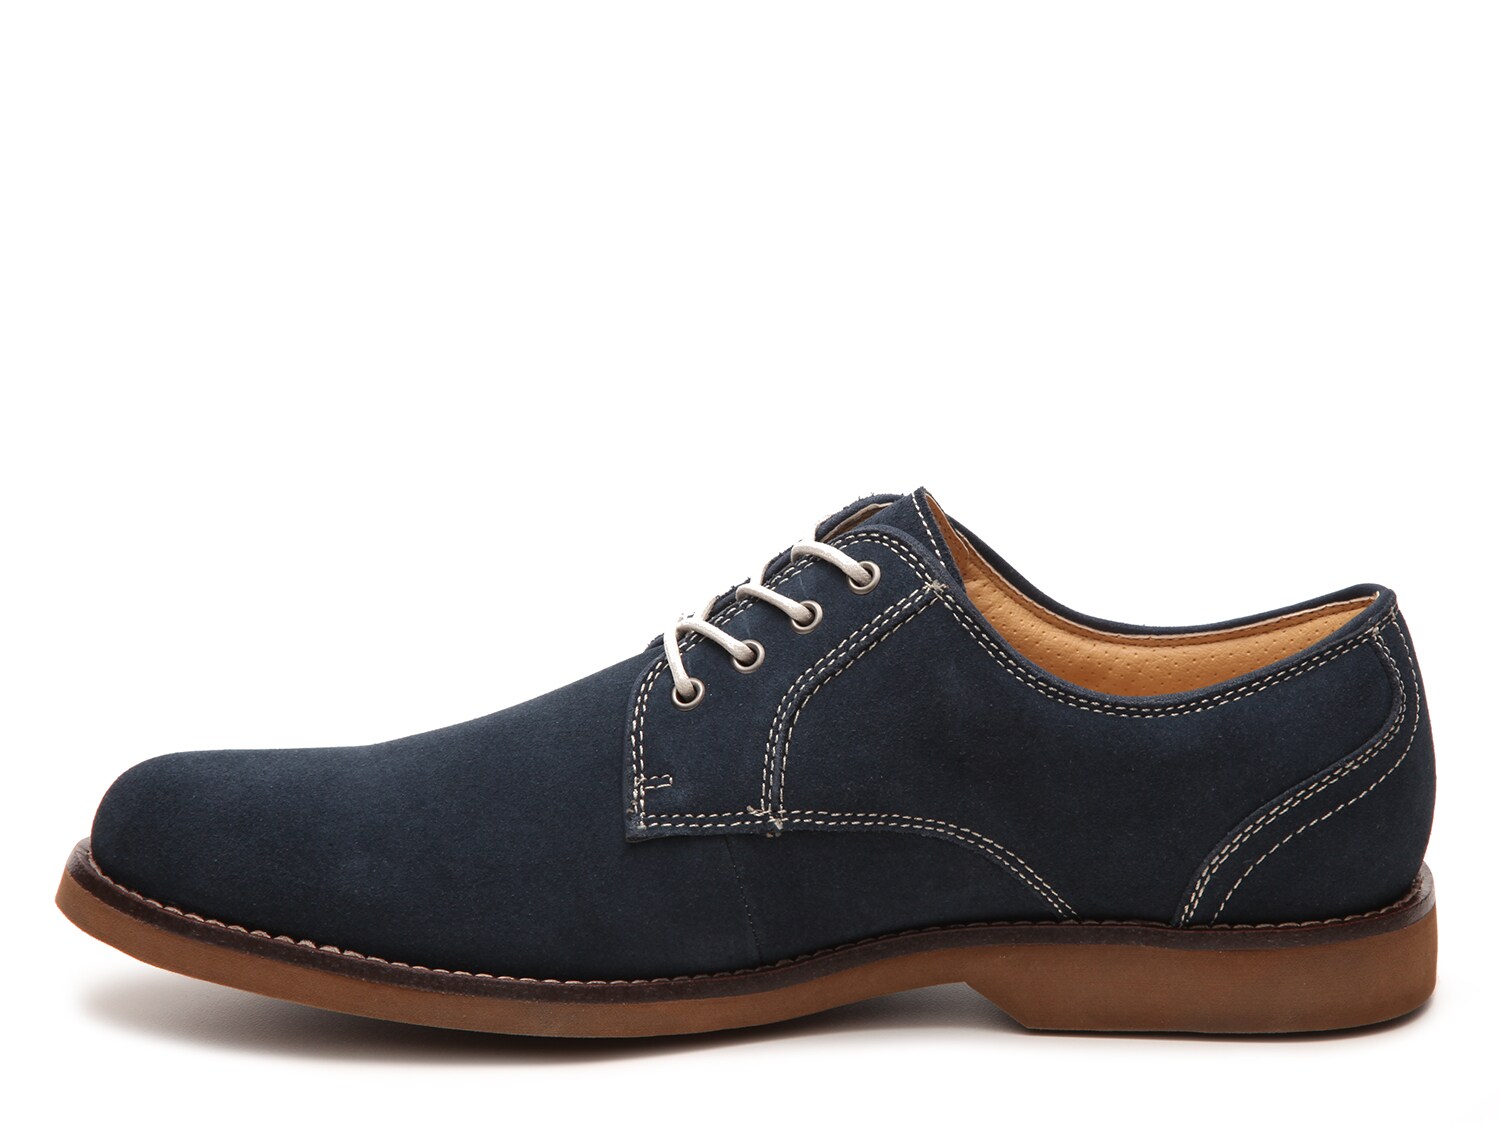 G.H. Bass & Co. Proctor Oxford | DSW